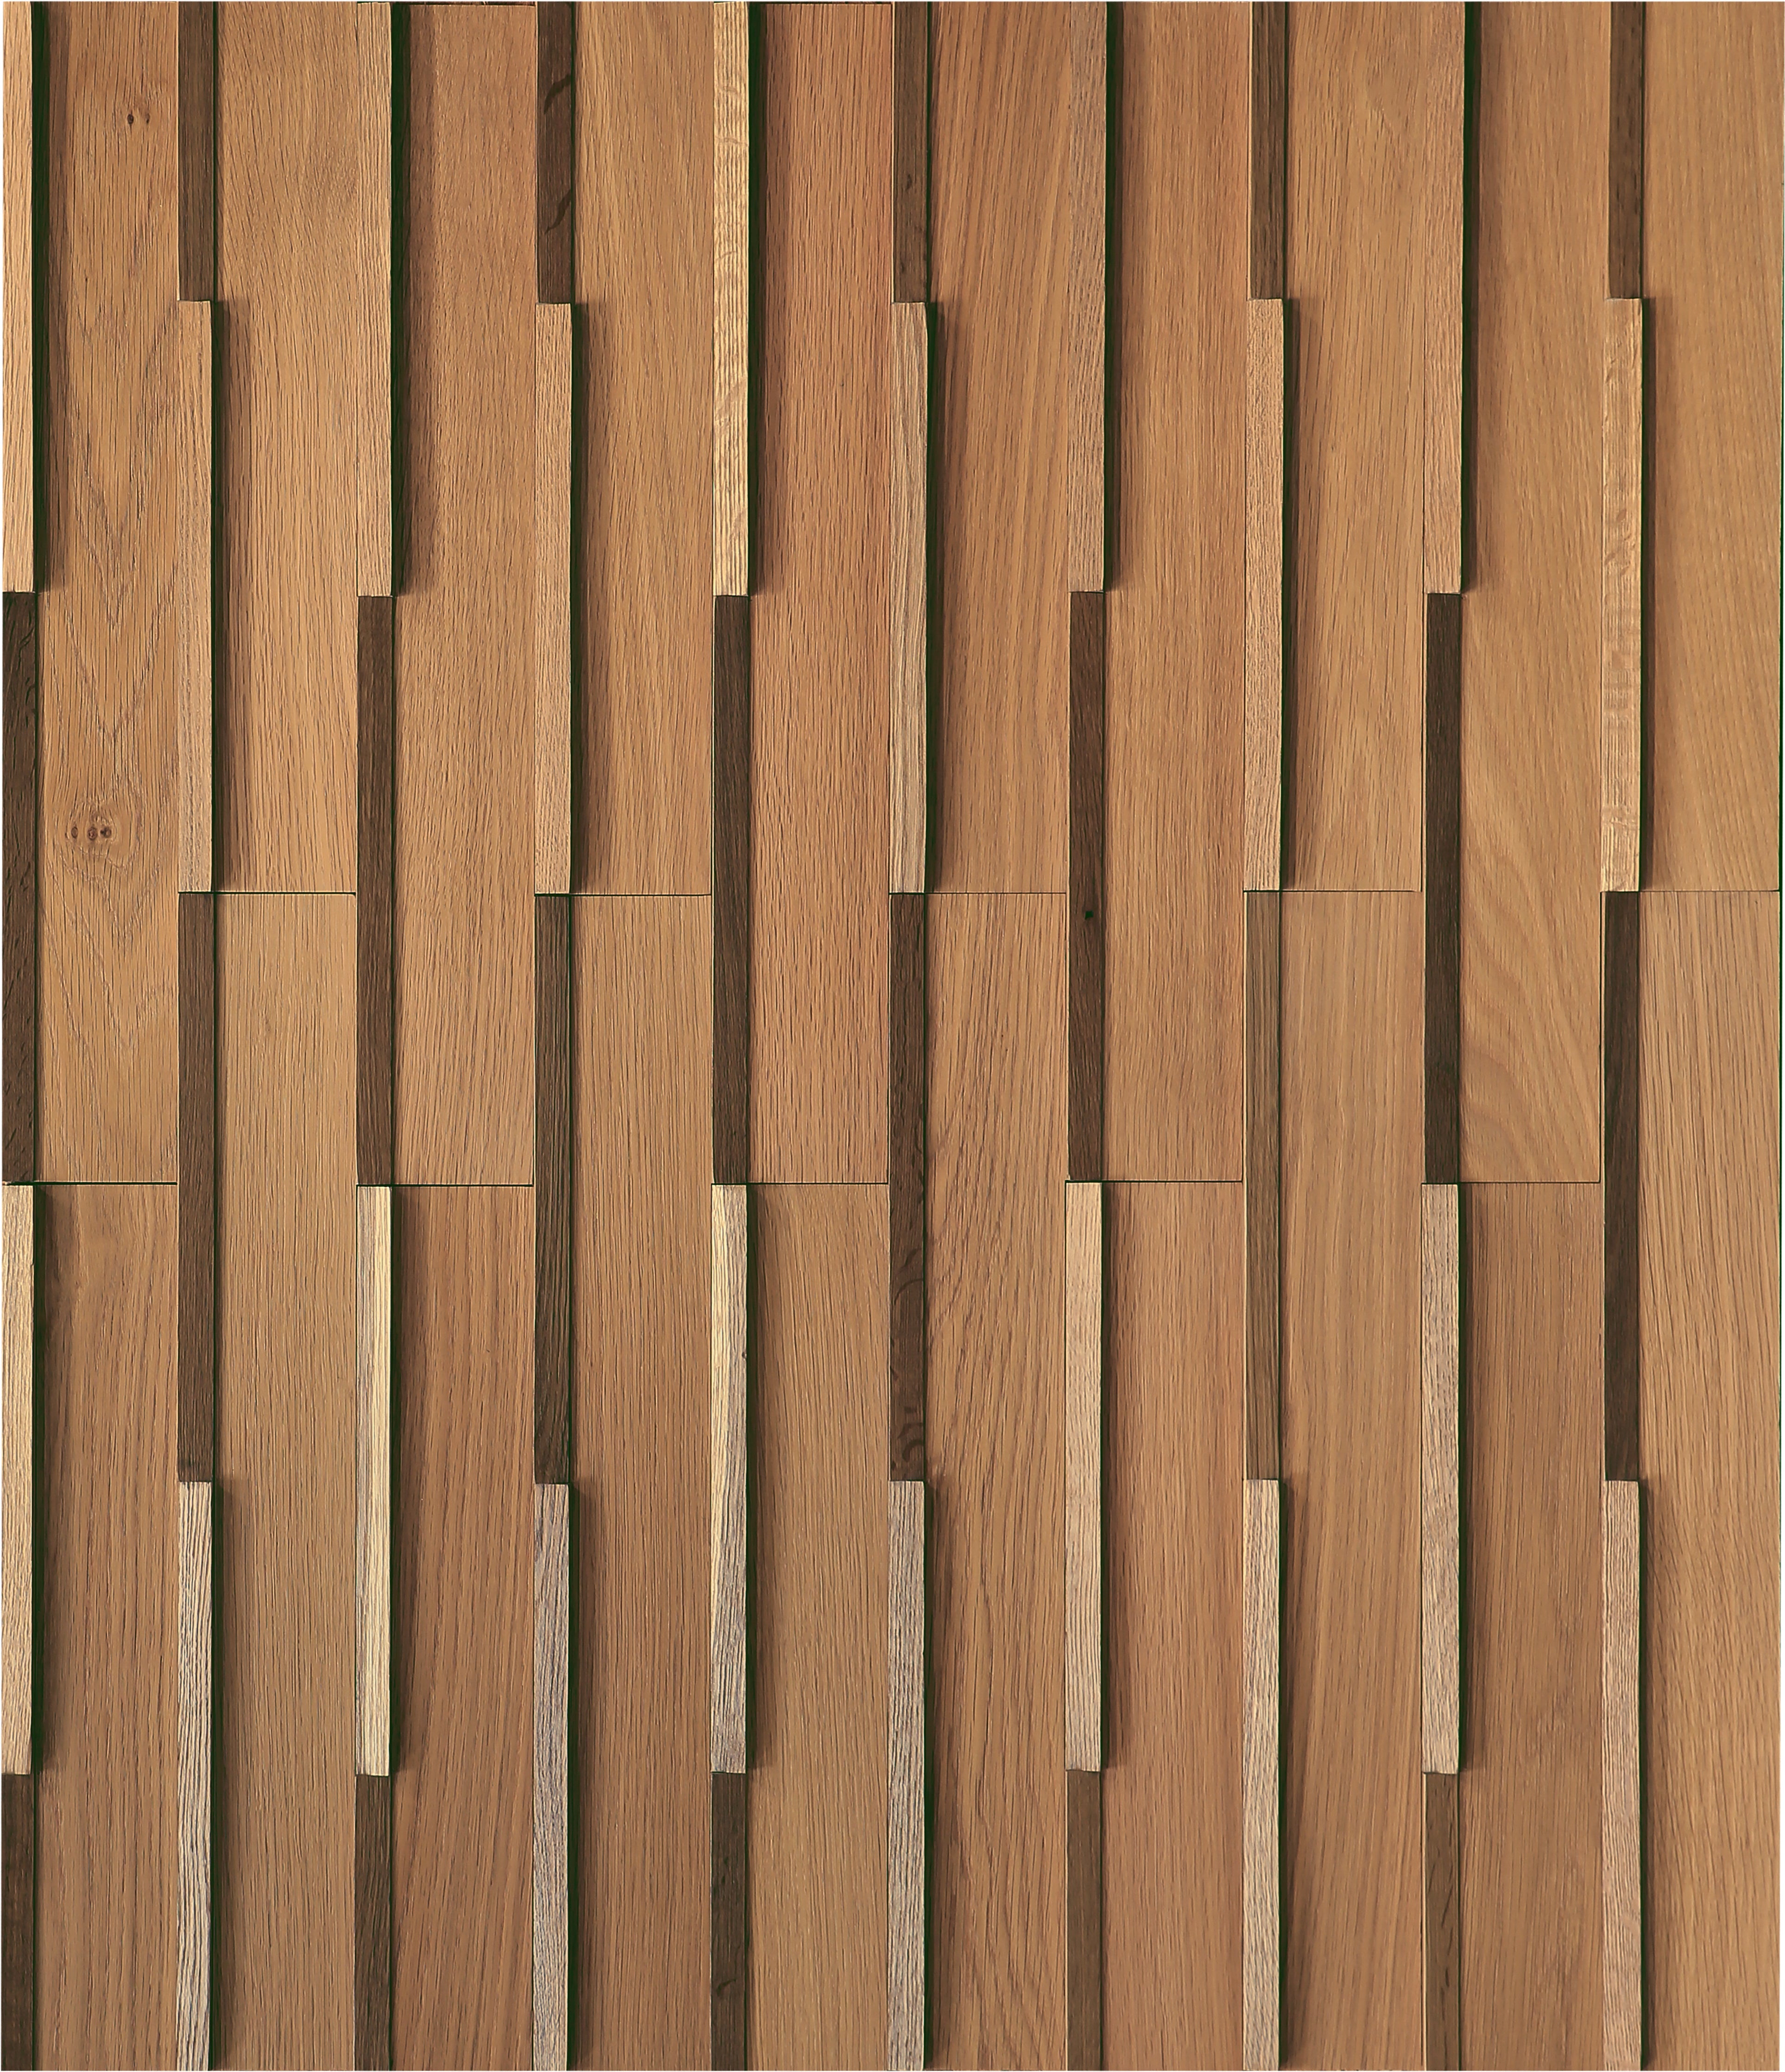 duchateau inceptiv edge olde dutch oak three dimensional wall natural wood panel lacquer for interior use distributed by surface group international